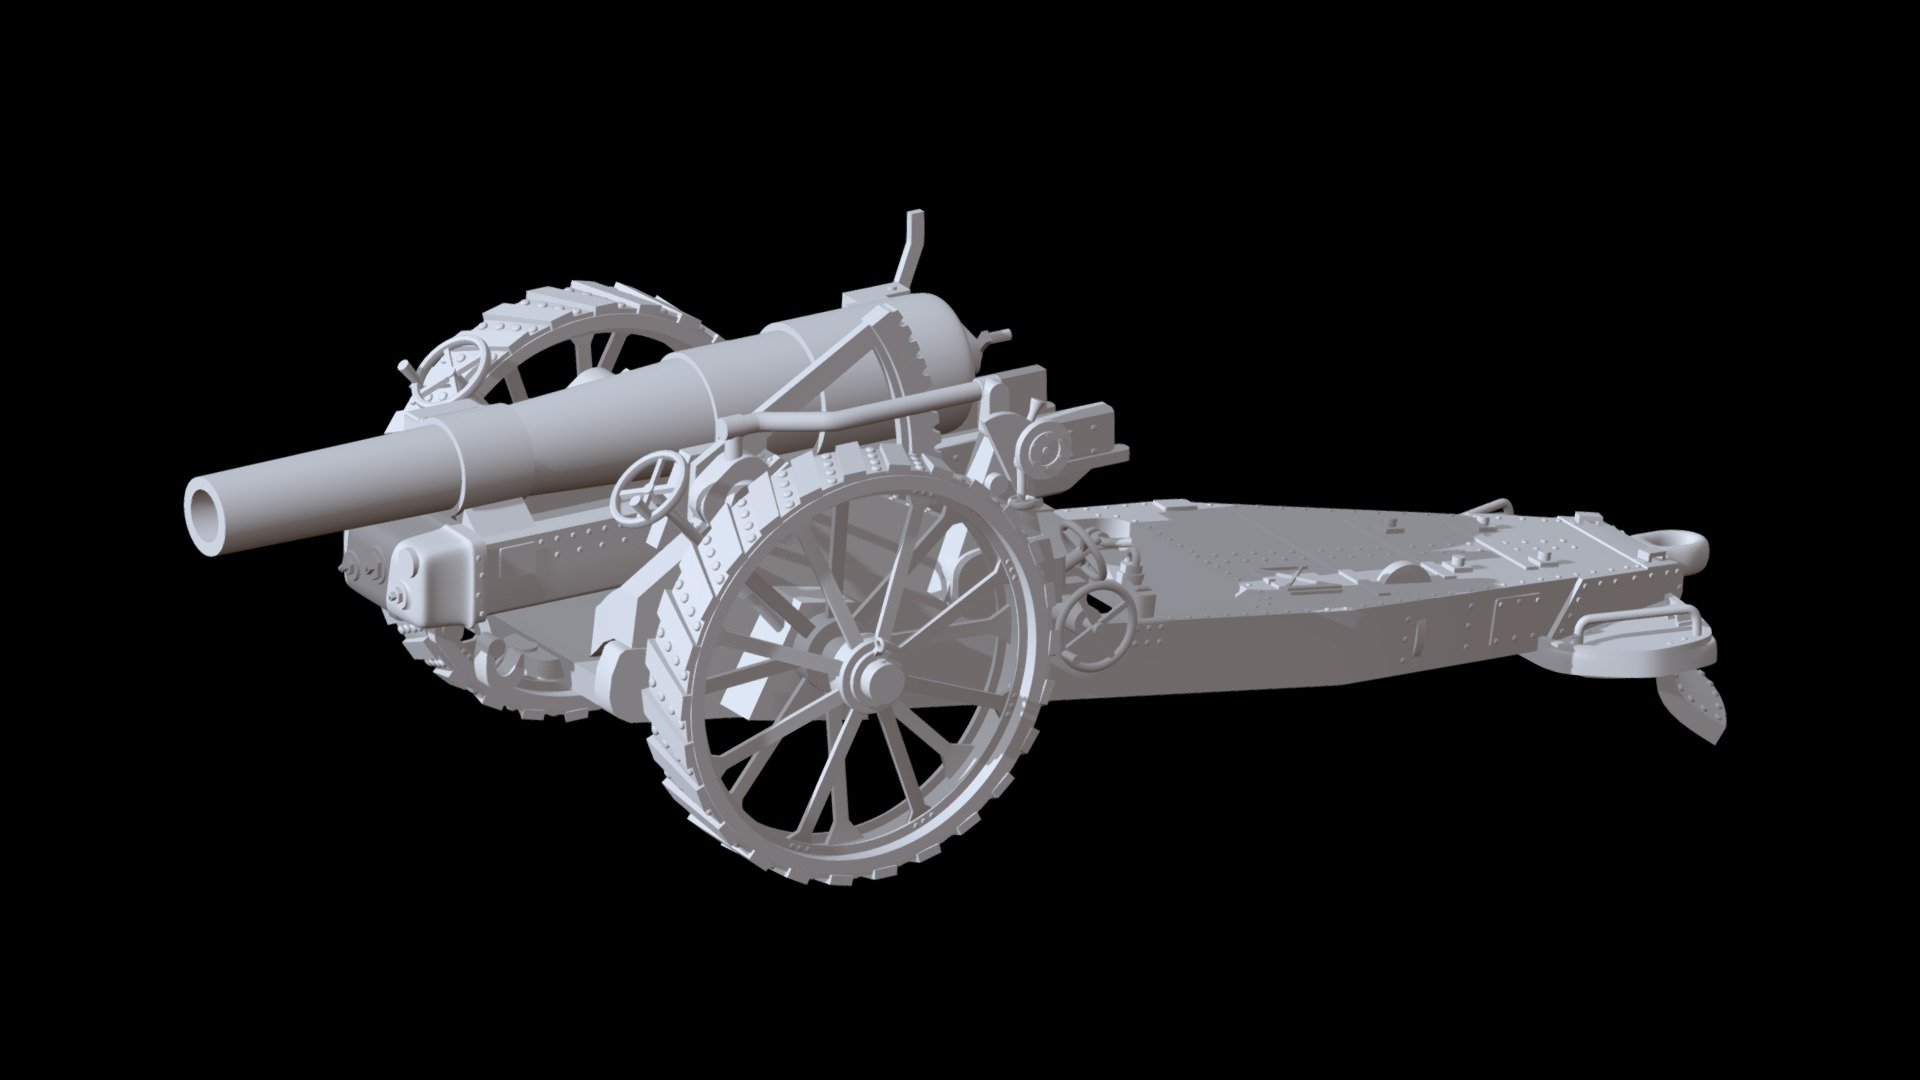 The format is OBJ, STL, Zbrush. Model for printing on a 3d printer. Scale 1:16 - Howitzer Mark VI UK - Buy Royalty Free 3D model by explorertit36@gmail.com (@paydi) 3d model